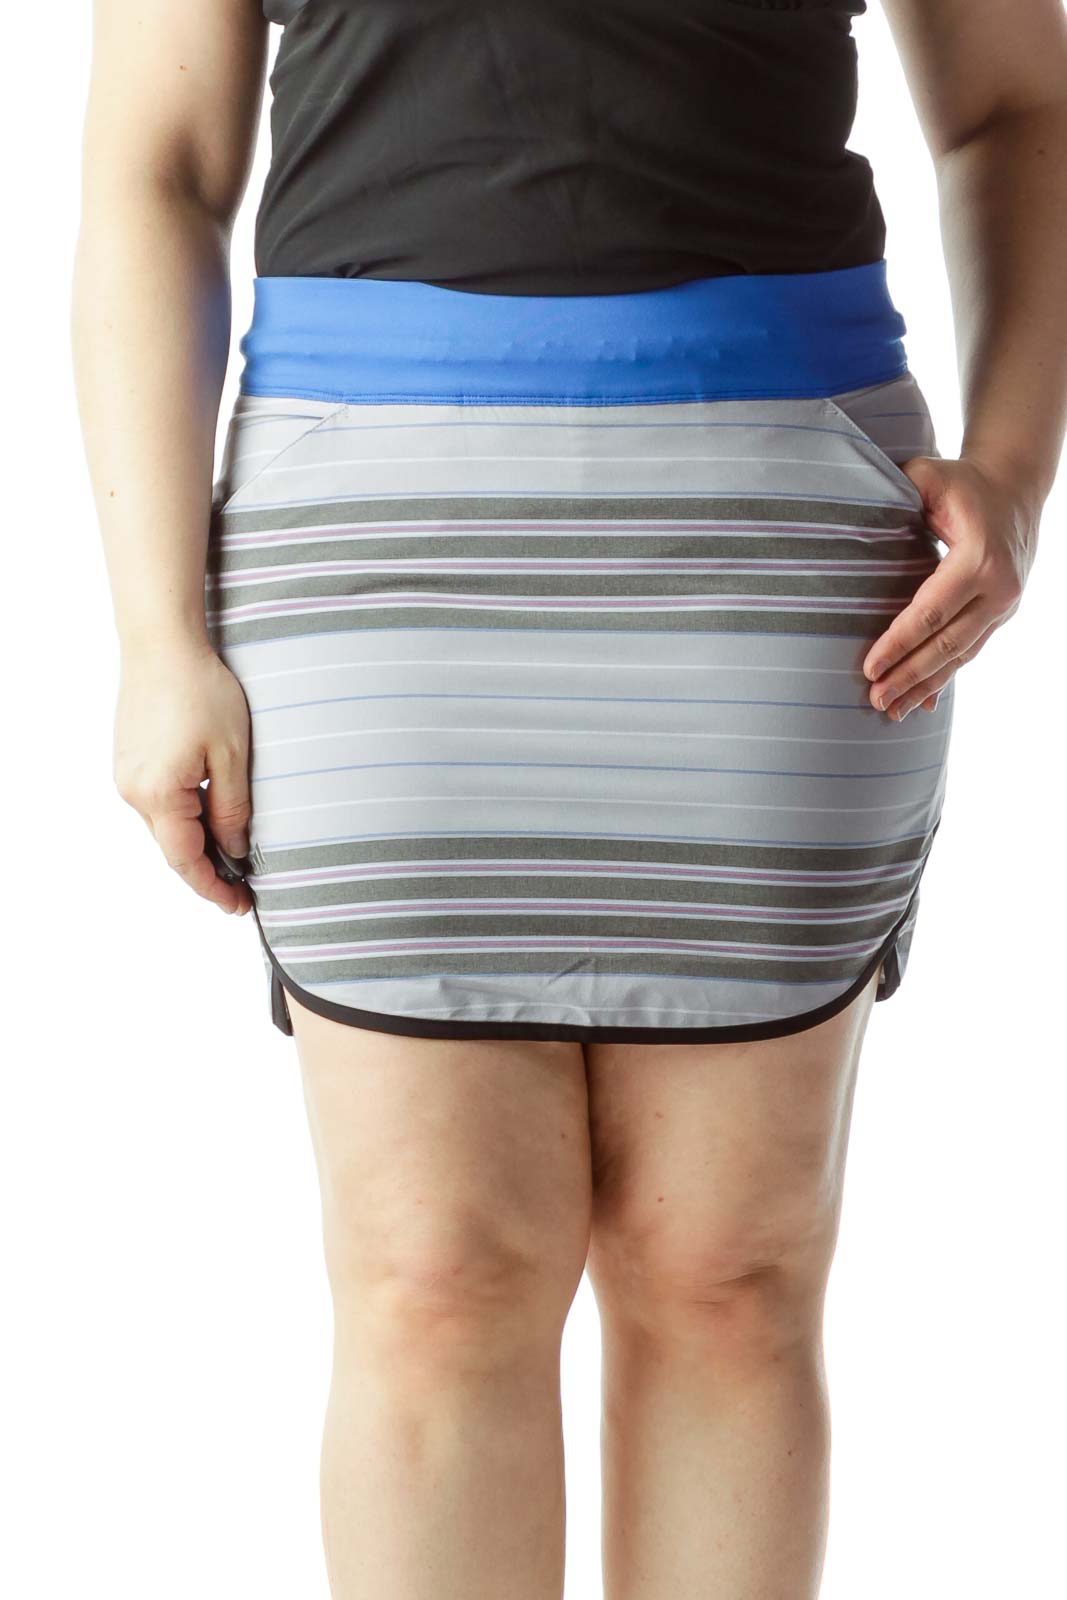 Multicolored Striped Sports Skirt with Under Shorts Front